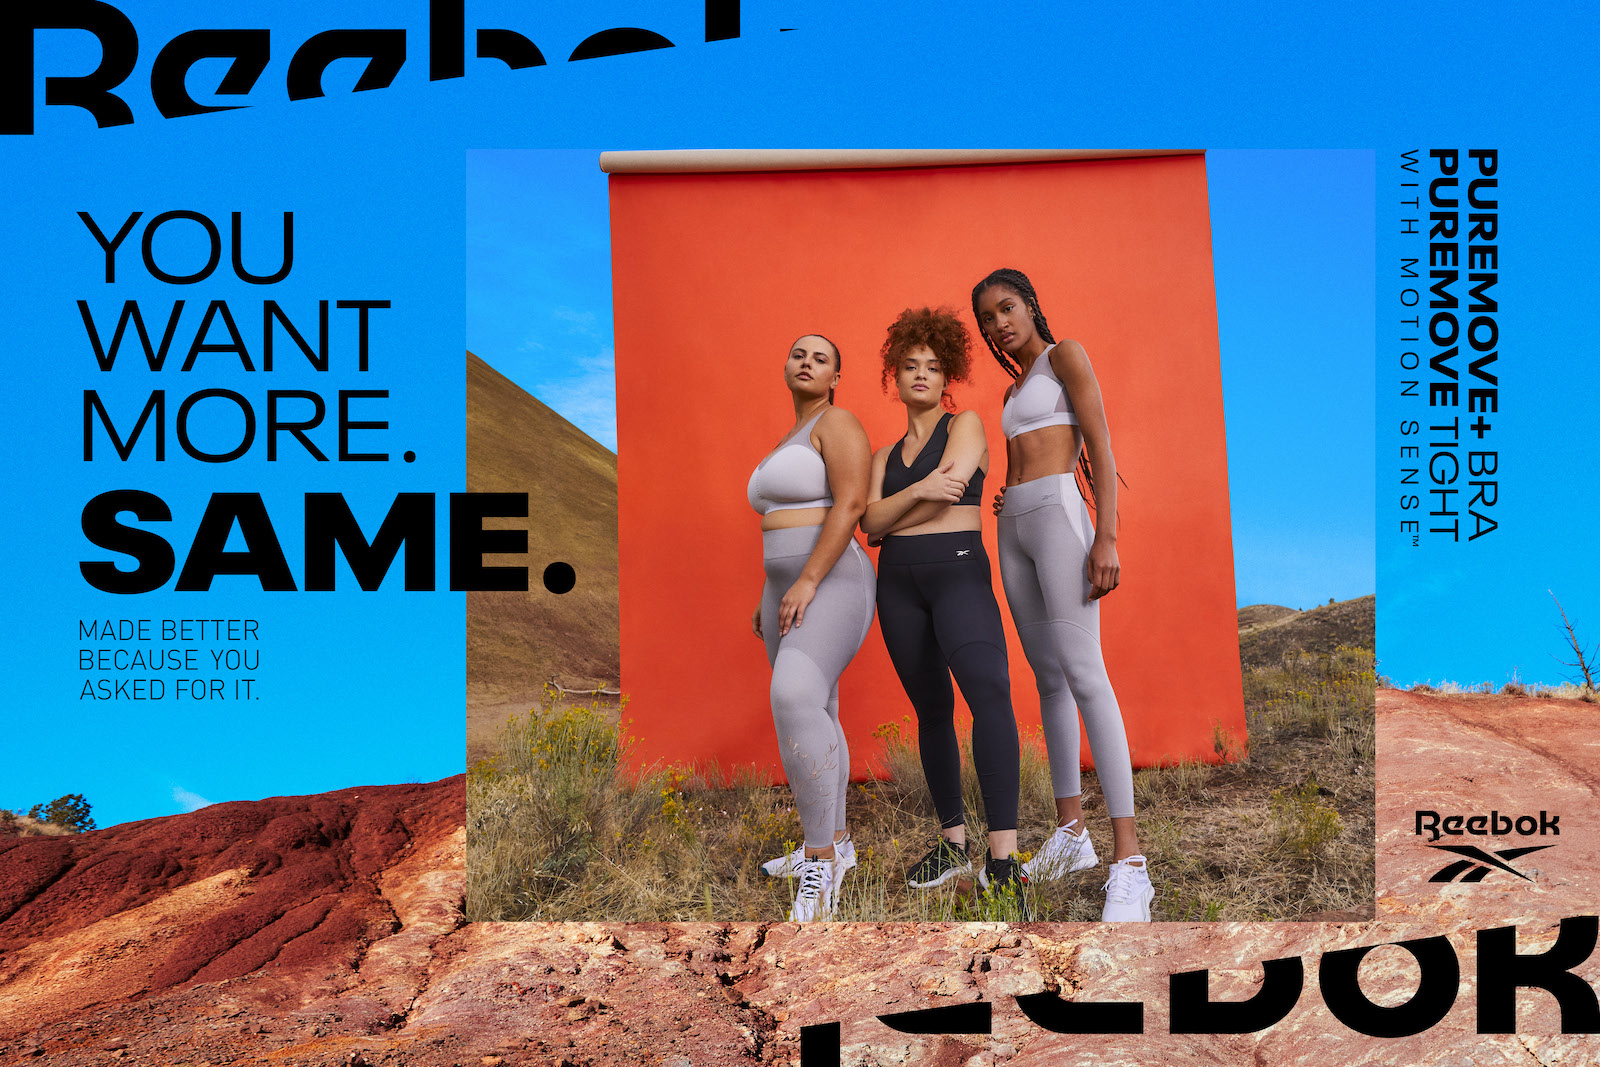 A horizontal example of Reebok PureMove campaign layout, with an image of models against the orange backdrop inset in another image of the red earth and blue sky environment, creating a layered contrast of colors as well as between geometric and organic shapes.